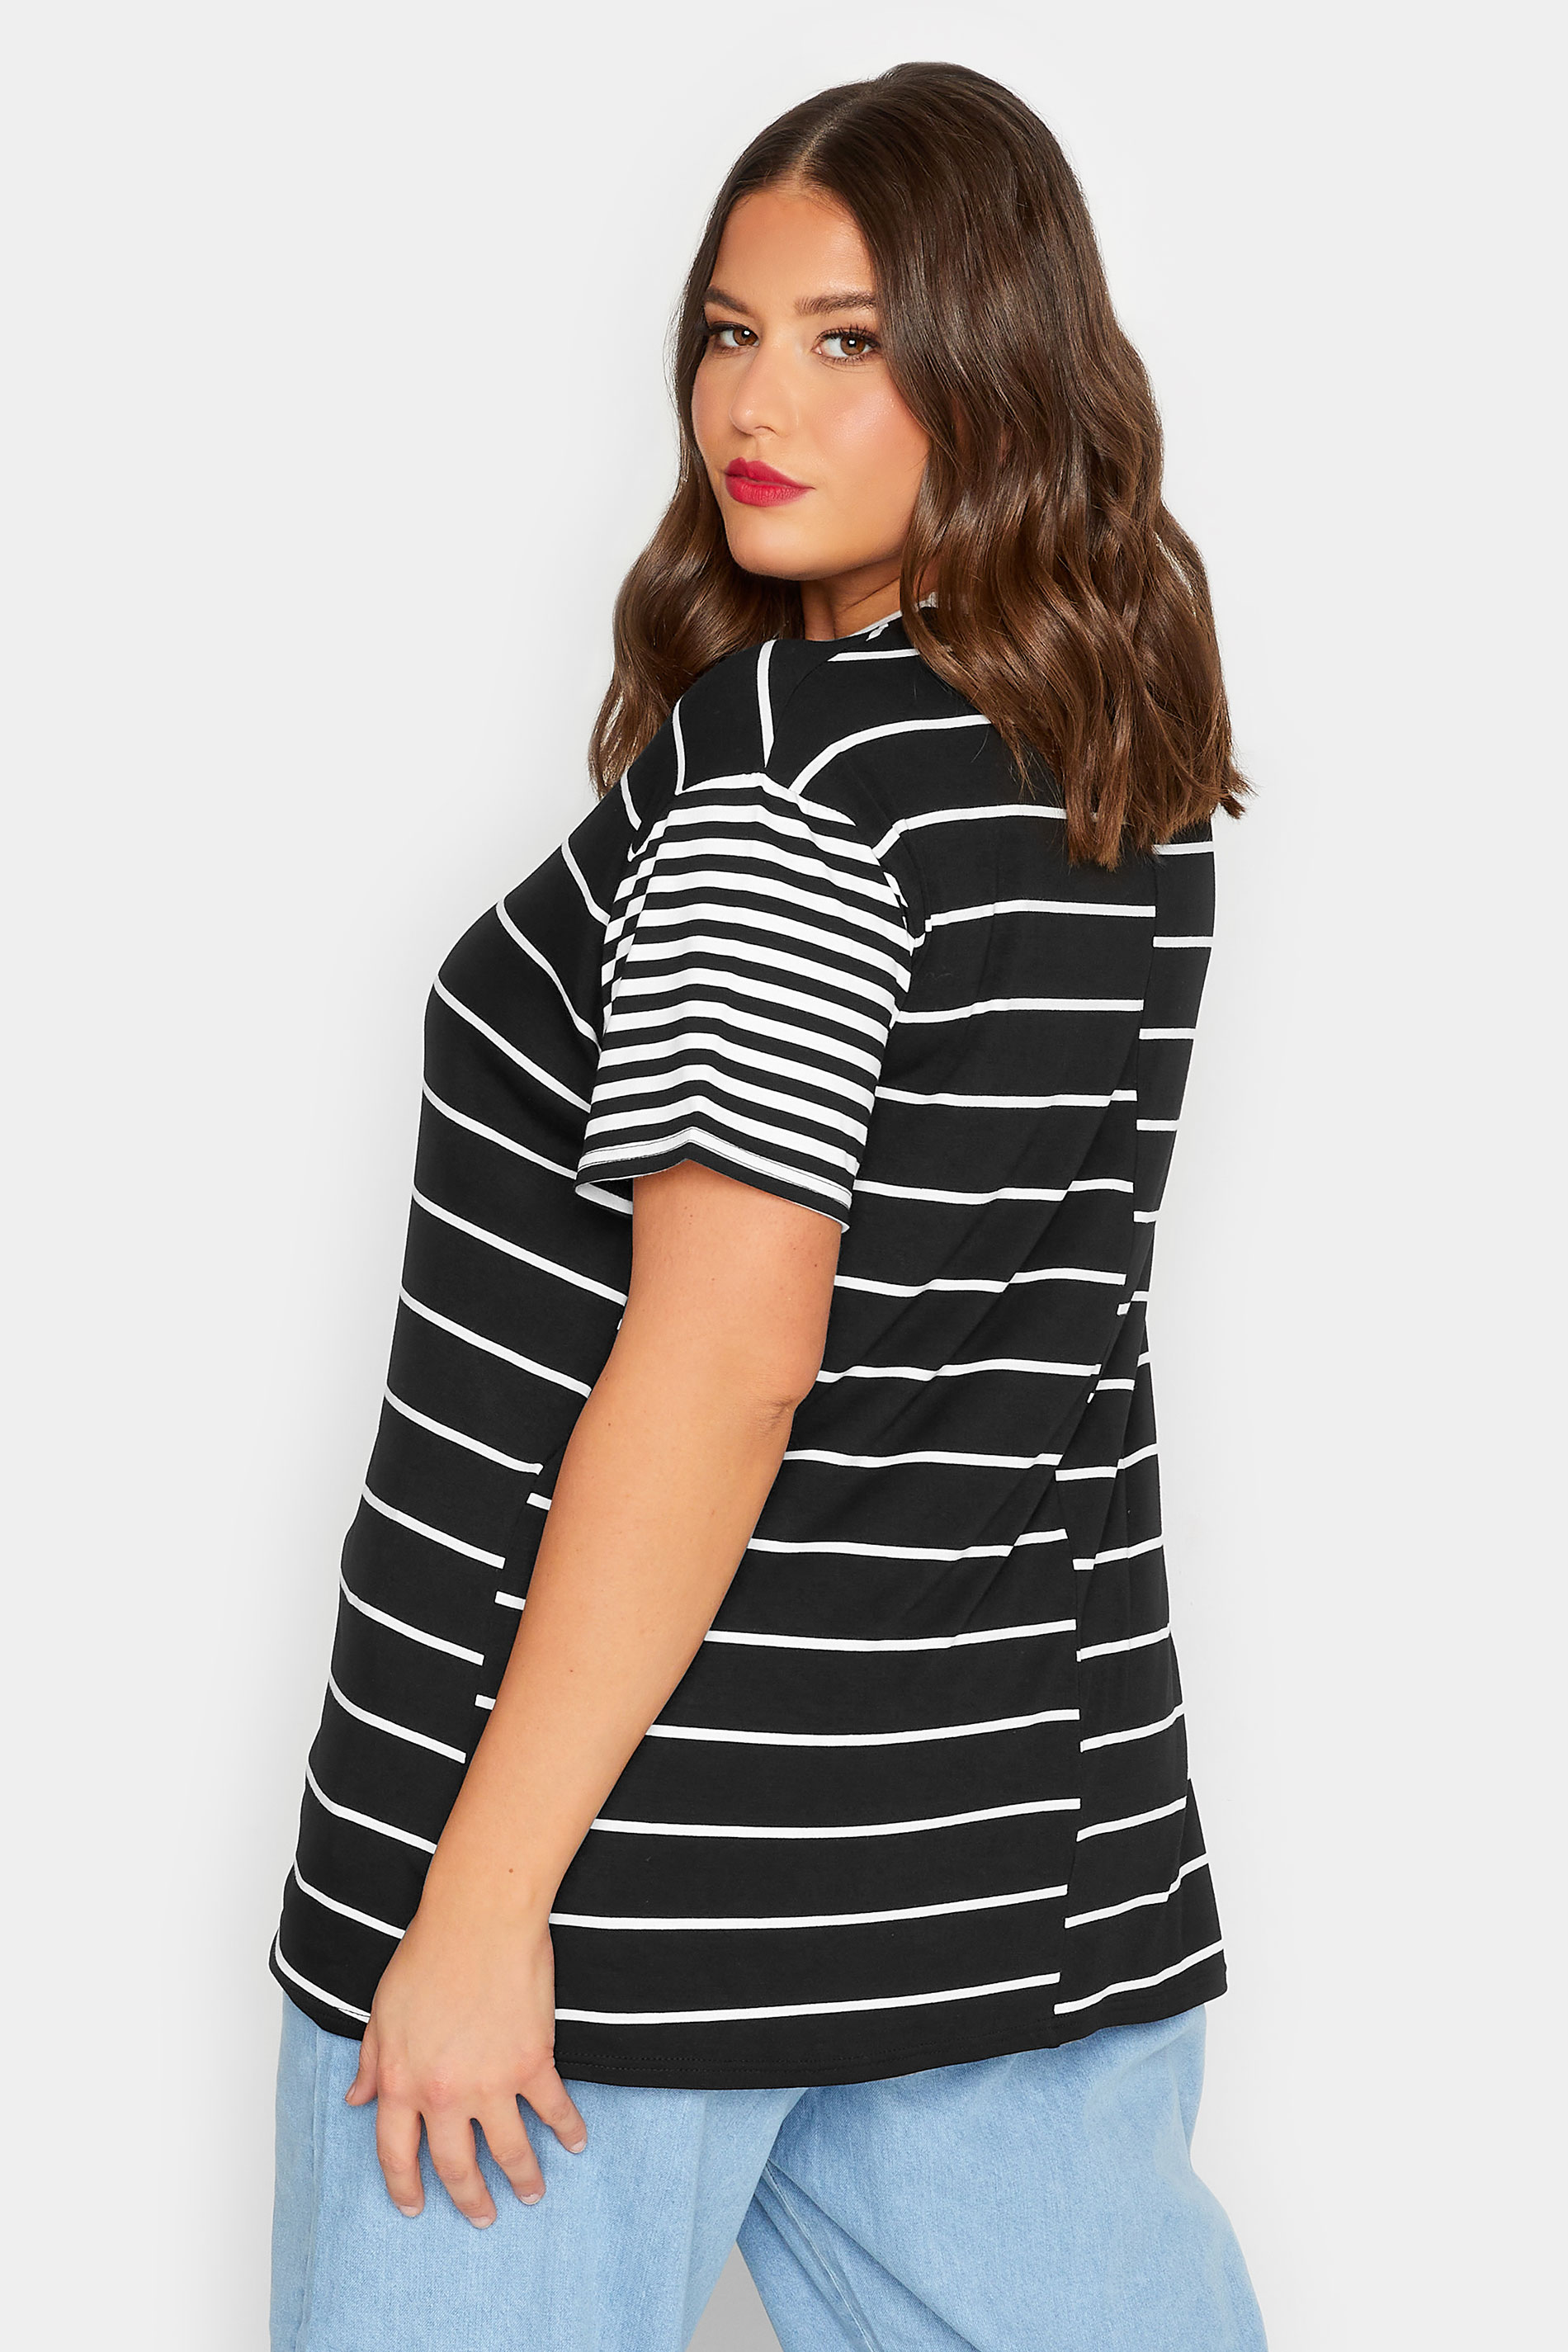 LIMITED COLLECTION Plus Size Black Mixed Stripe Print T-Shirt | Yours Clothing 3